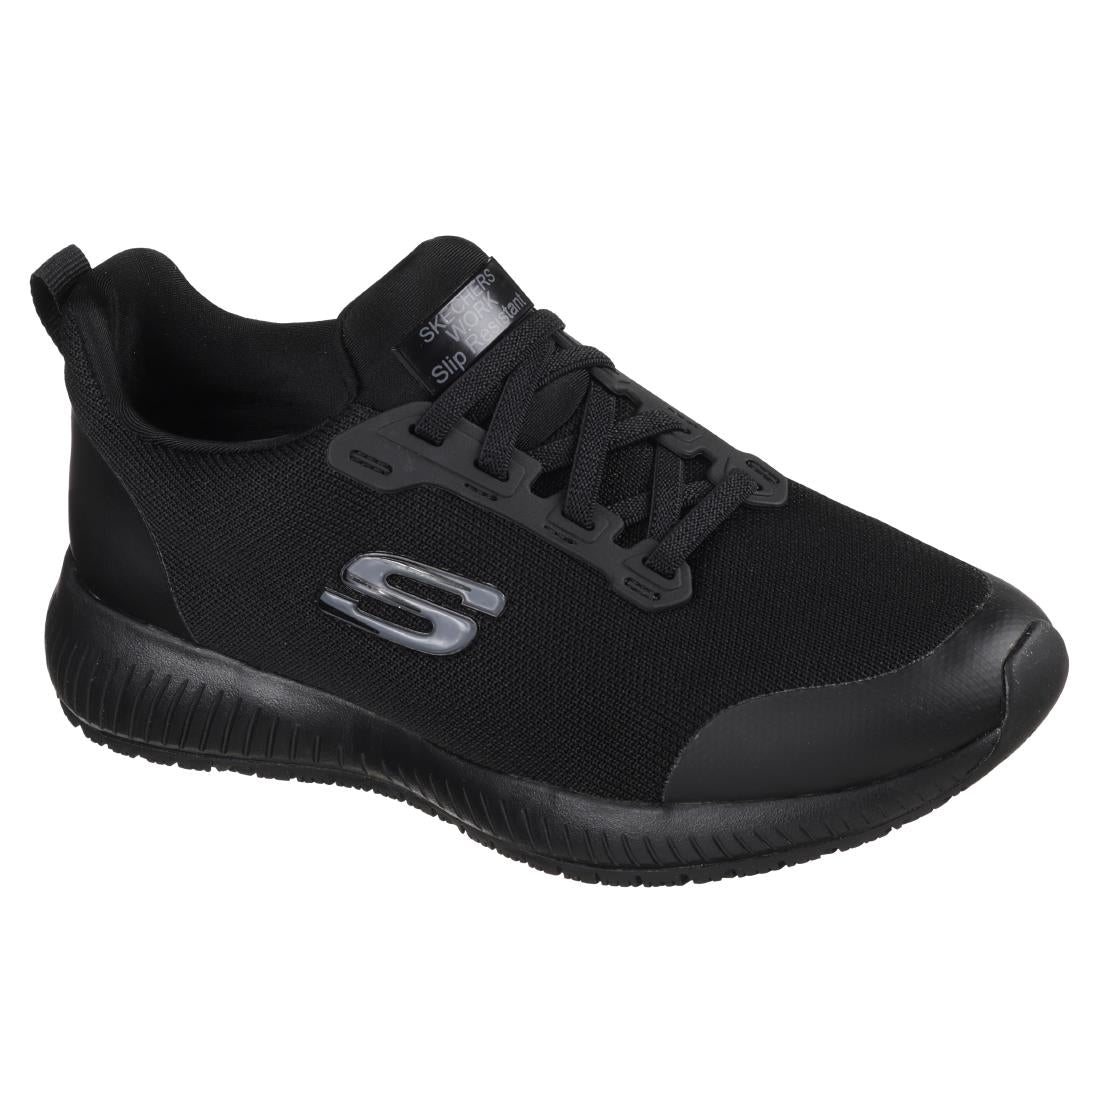 BB672-39 Skechers Womens Slip Resistant Squad Trainer Size 39 JD Catering Equipment Solutions Ltd